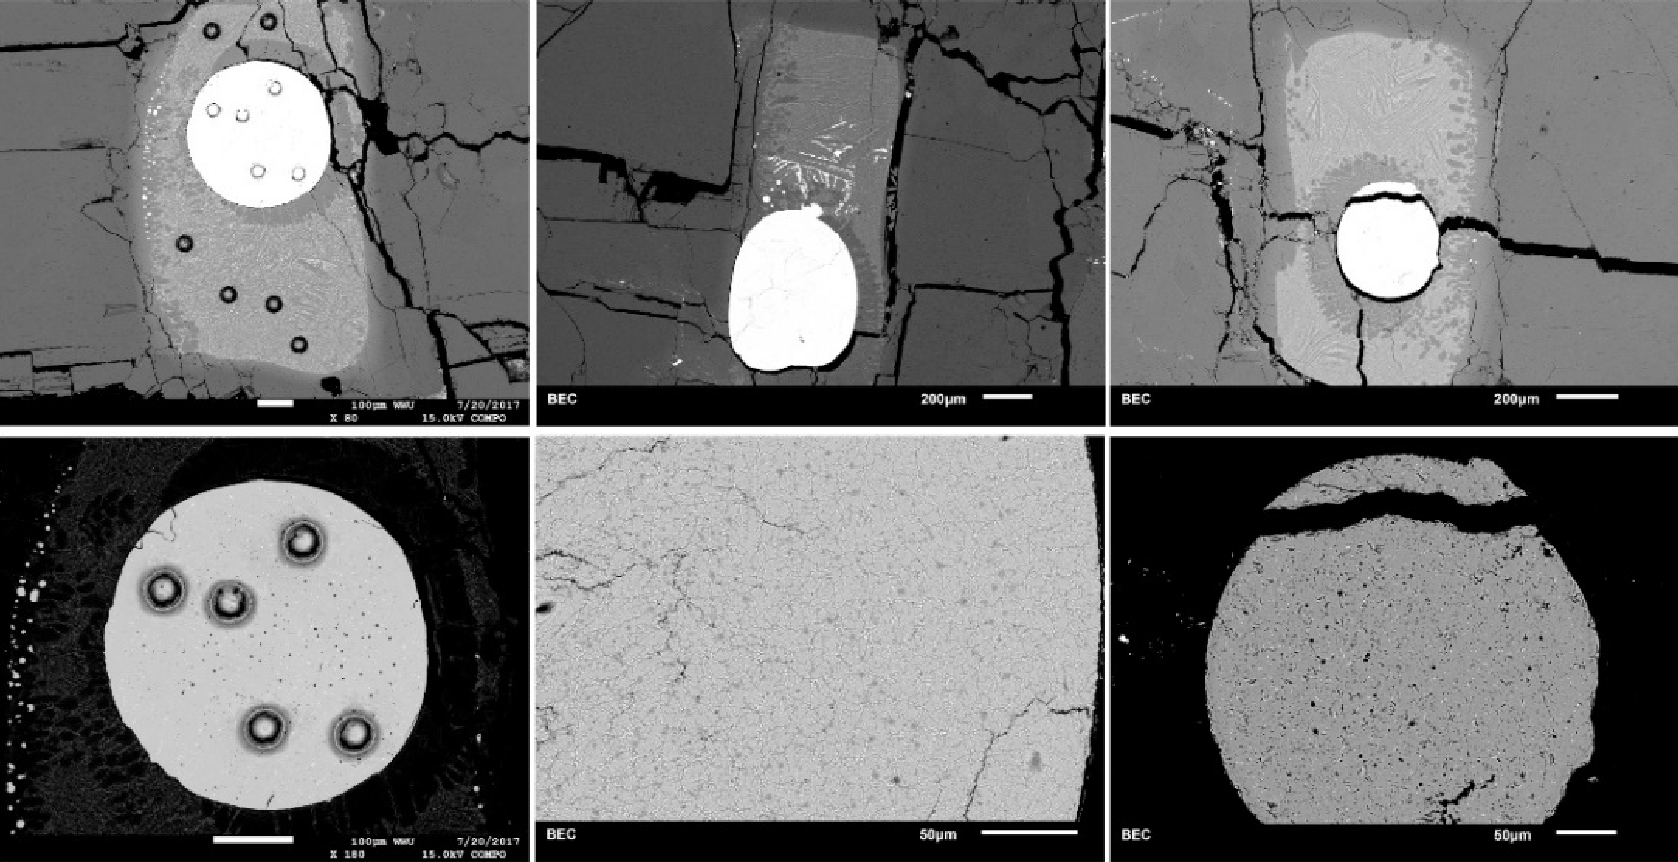 BSE images of run products from melt experiments.